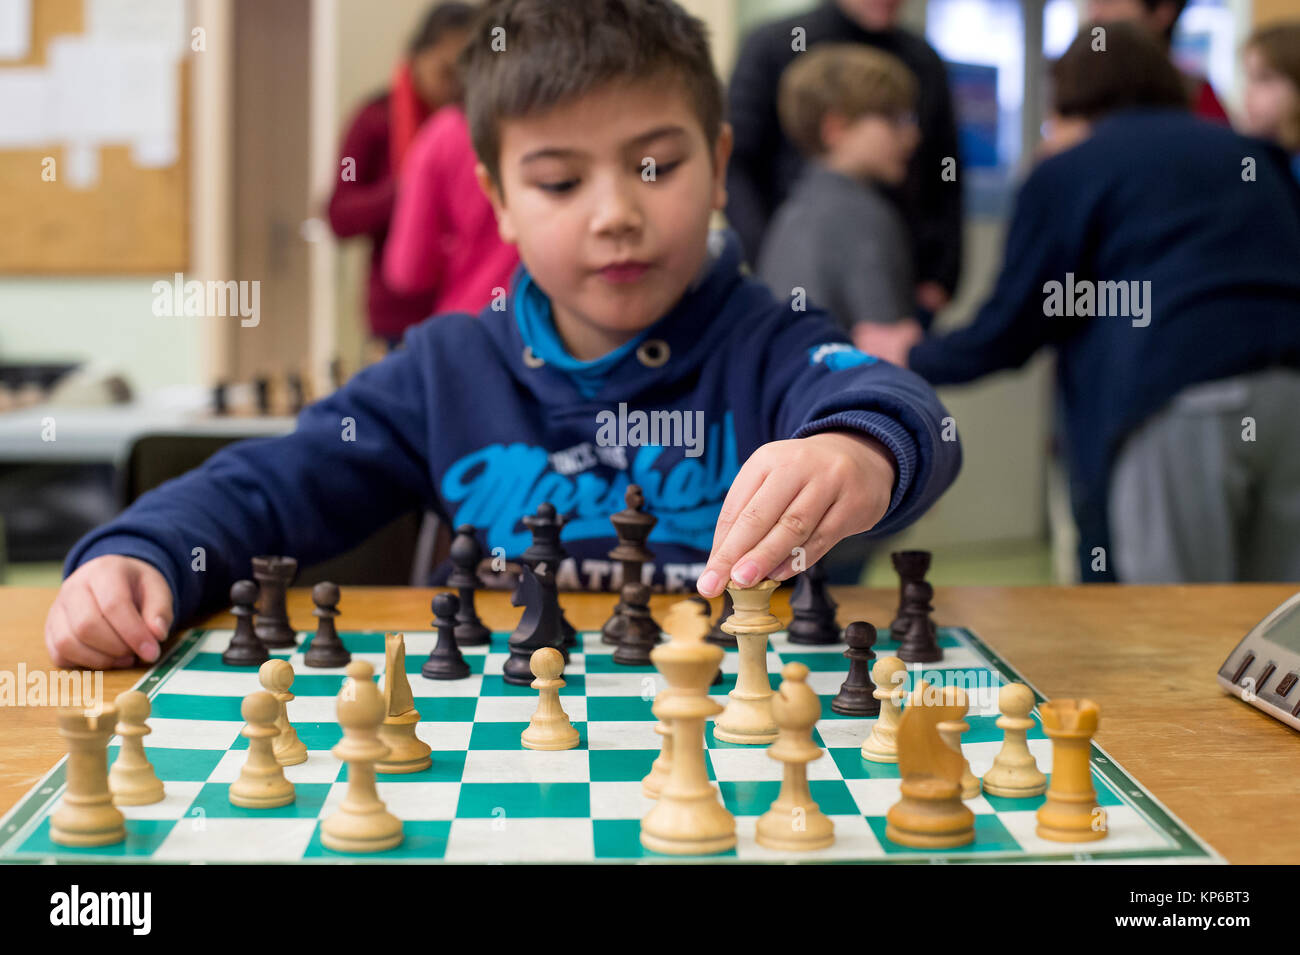 Boy playing chess. France. Stock Photo